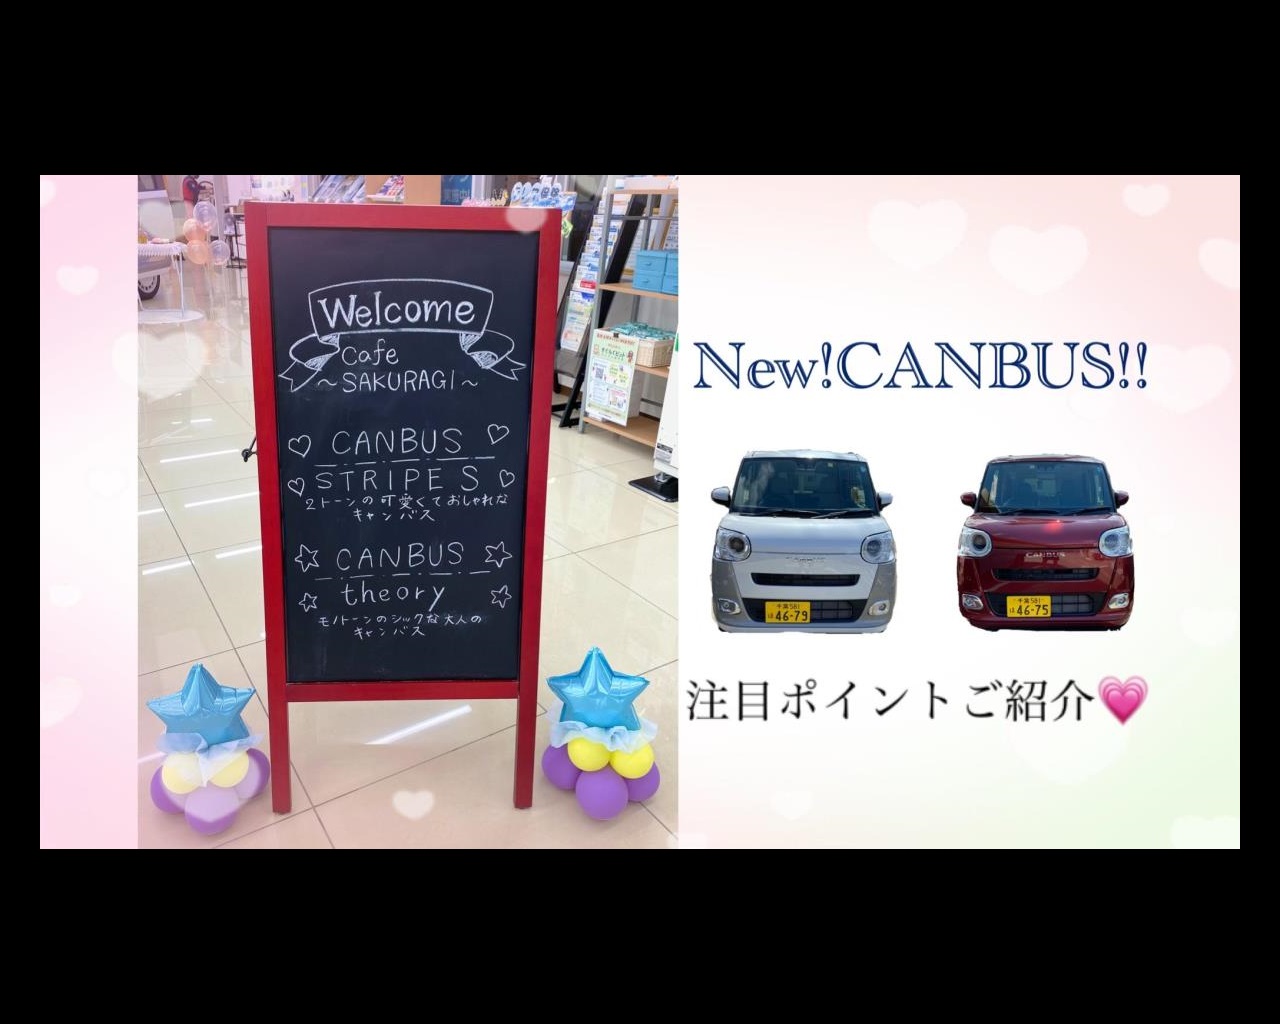 NEW　CANBUS！？